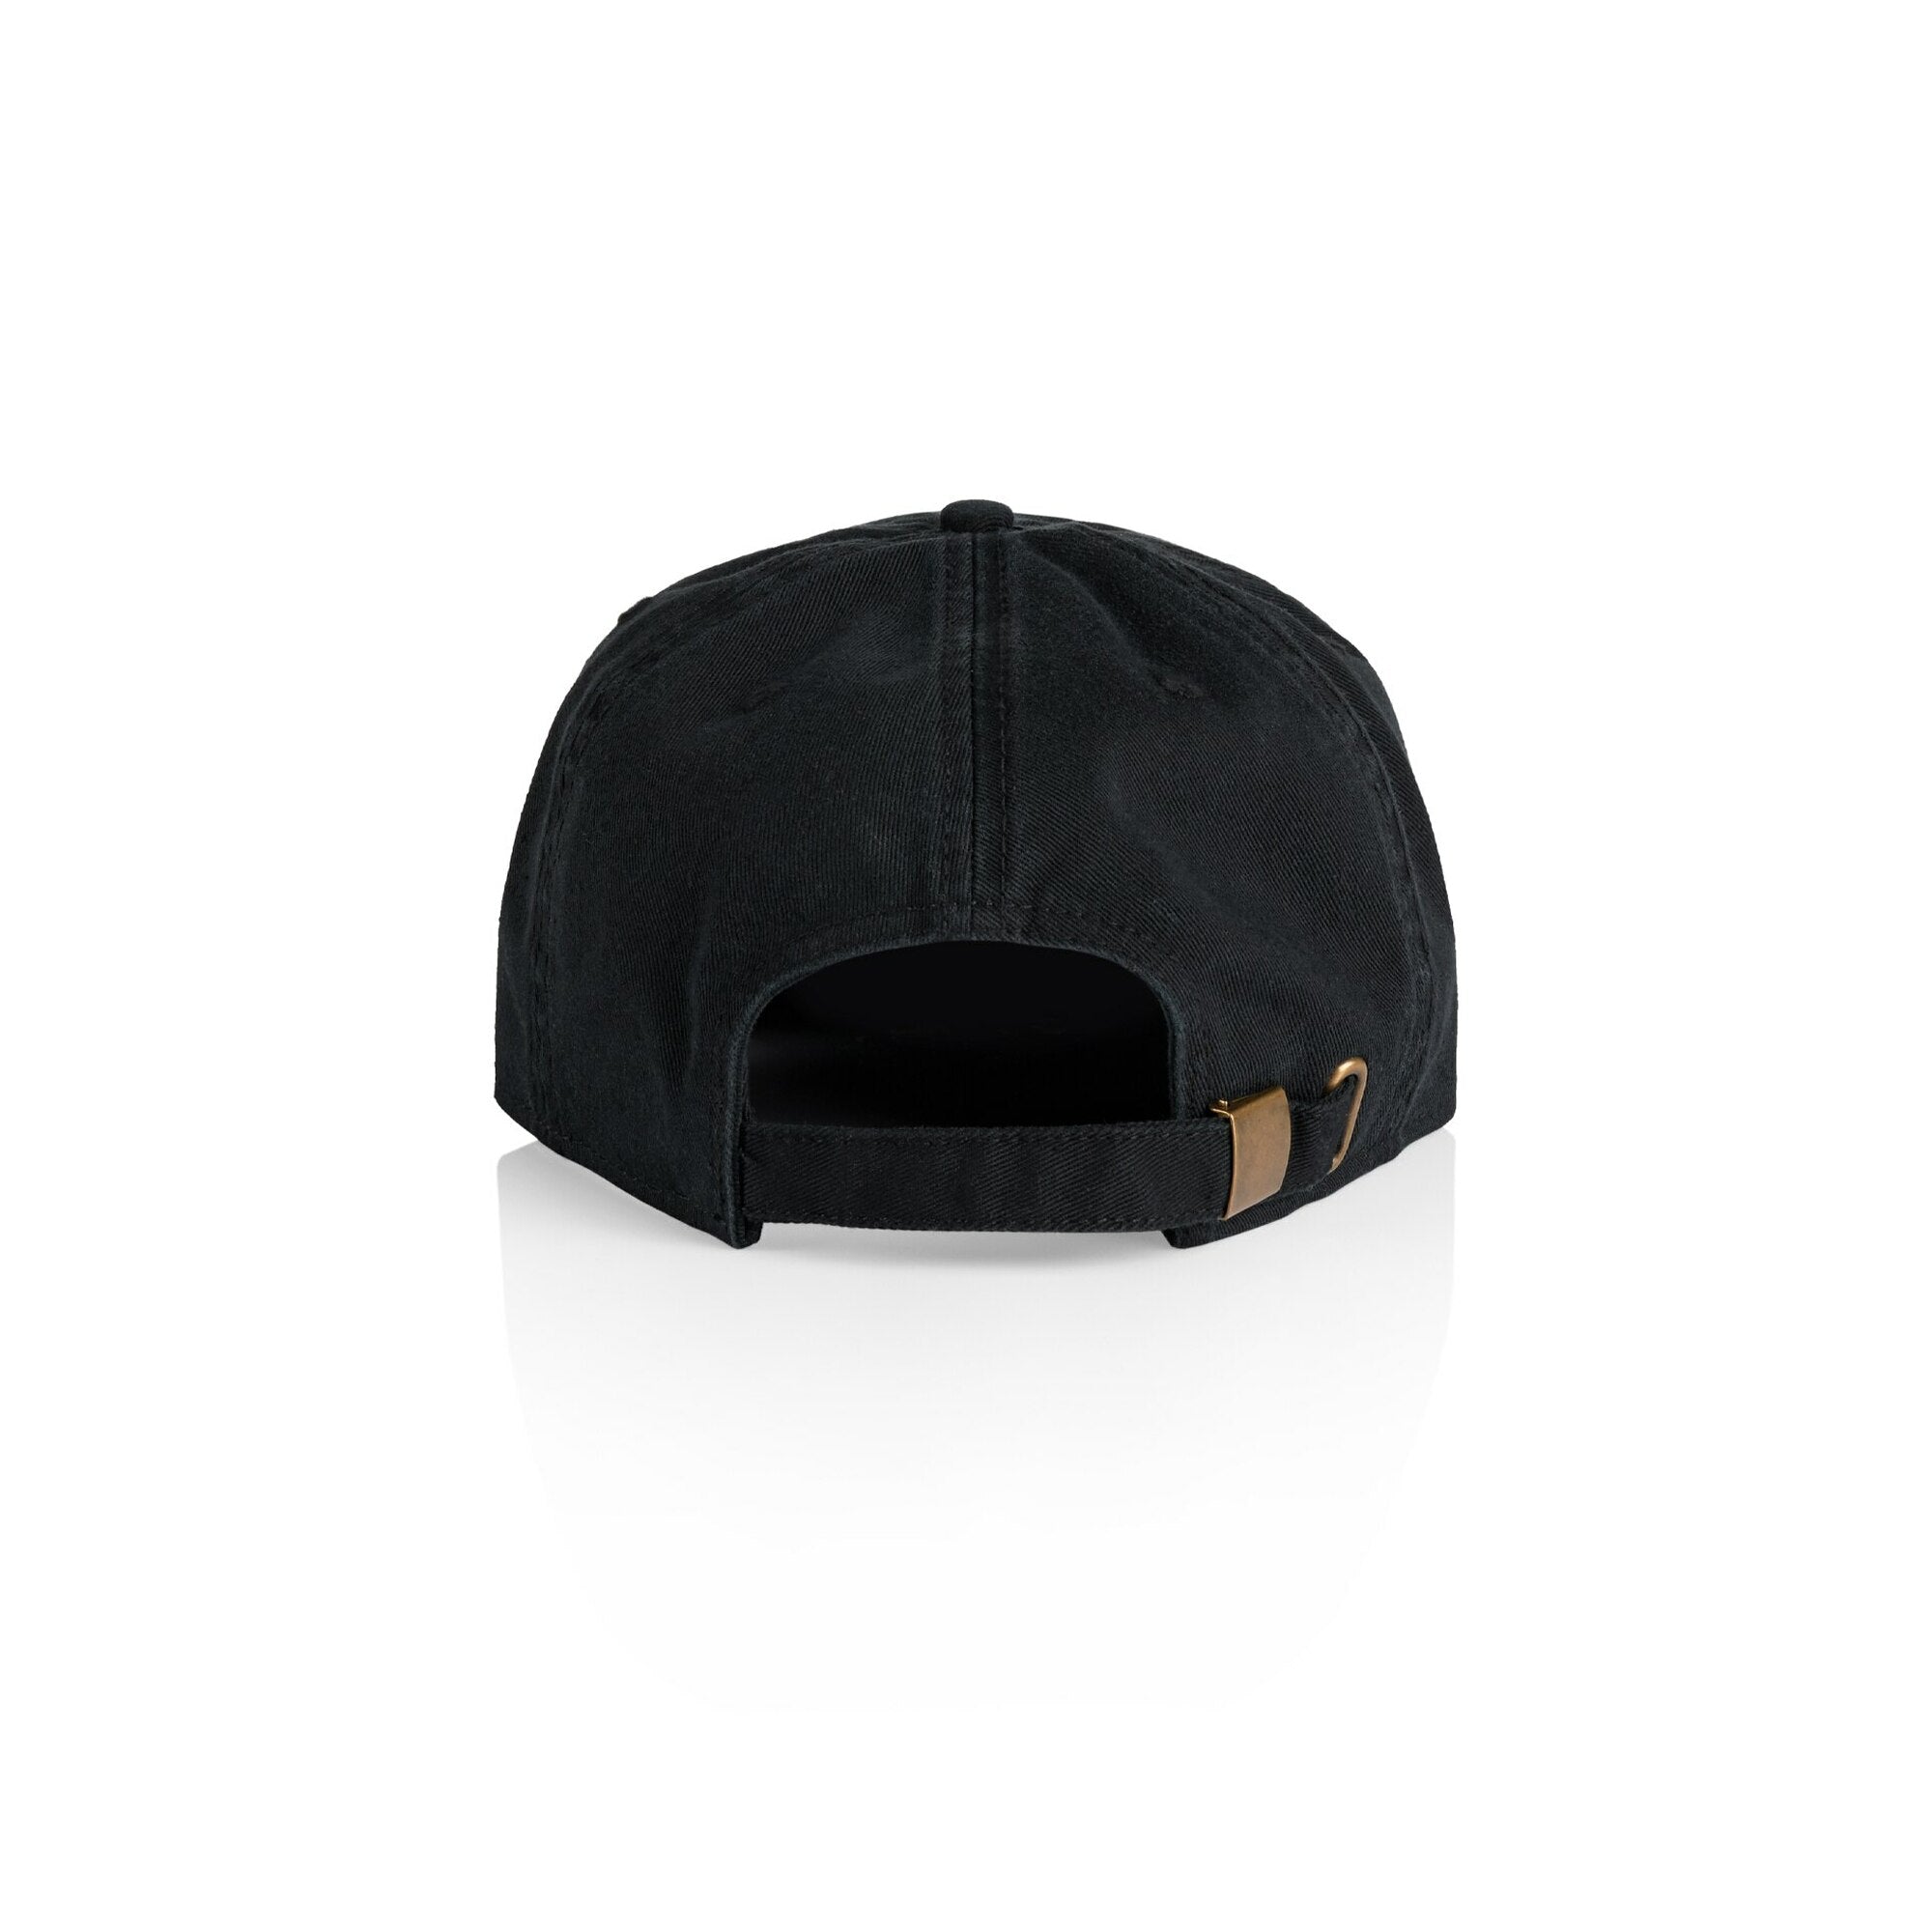 Unisex S W A G Embroided Cap